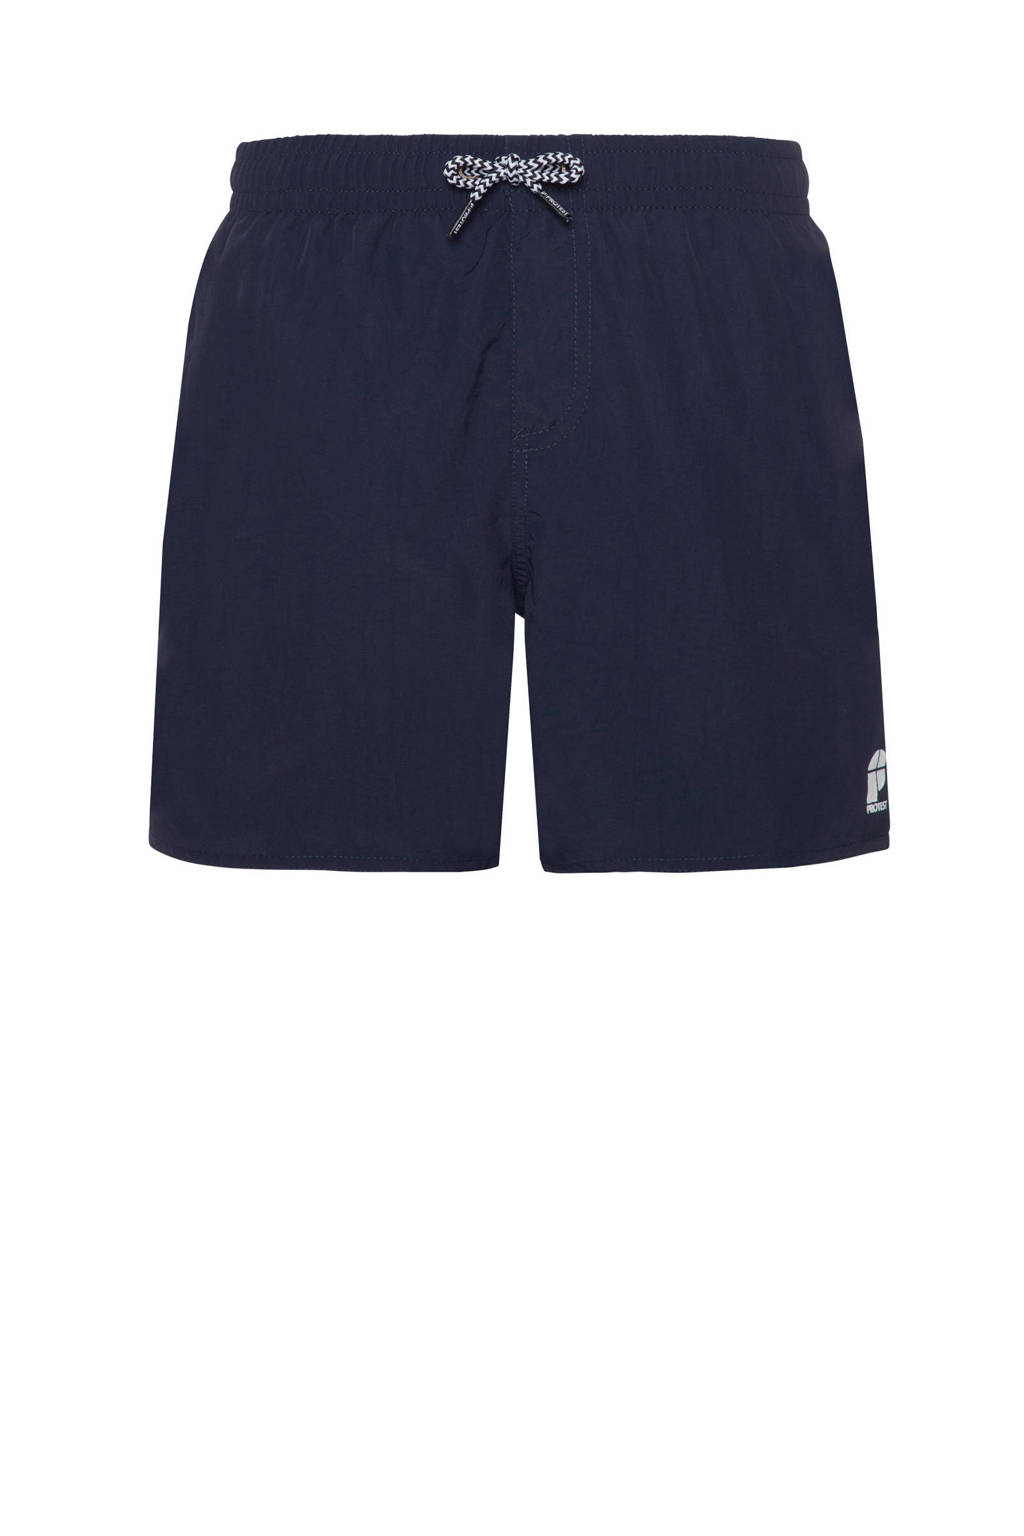 Protest zwemshort CULTURE JR donkerblauw, Donkerblauw